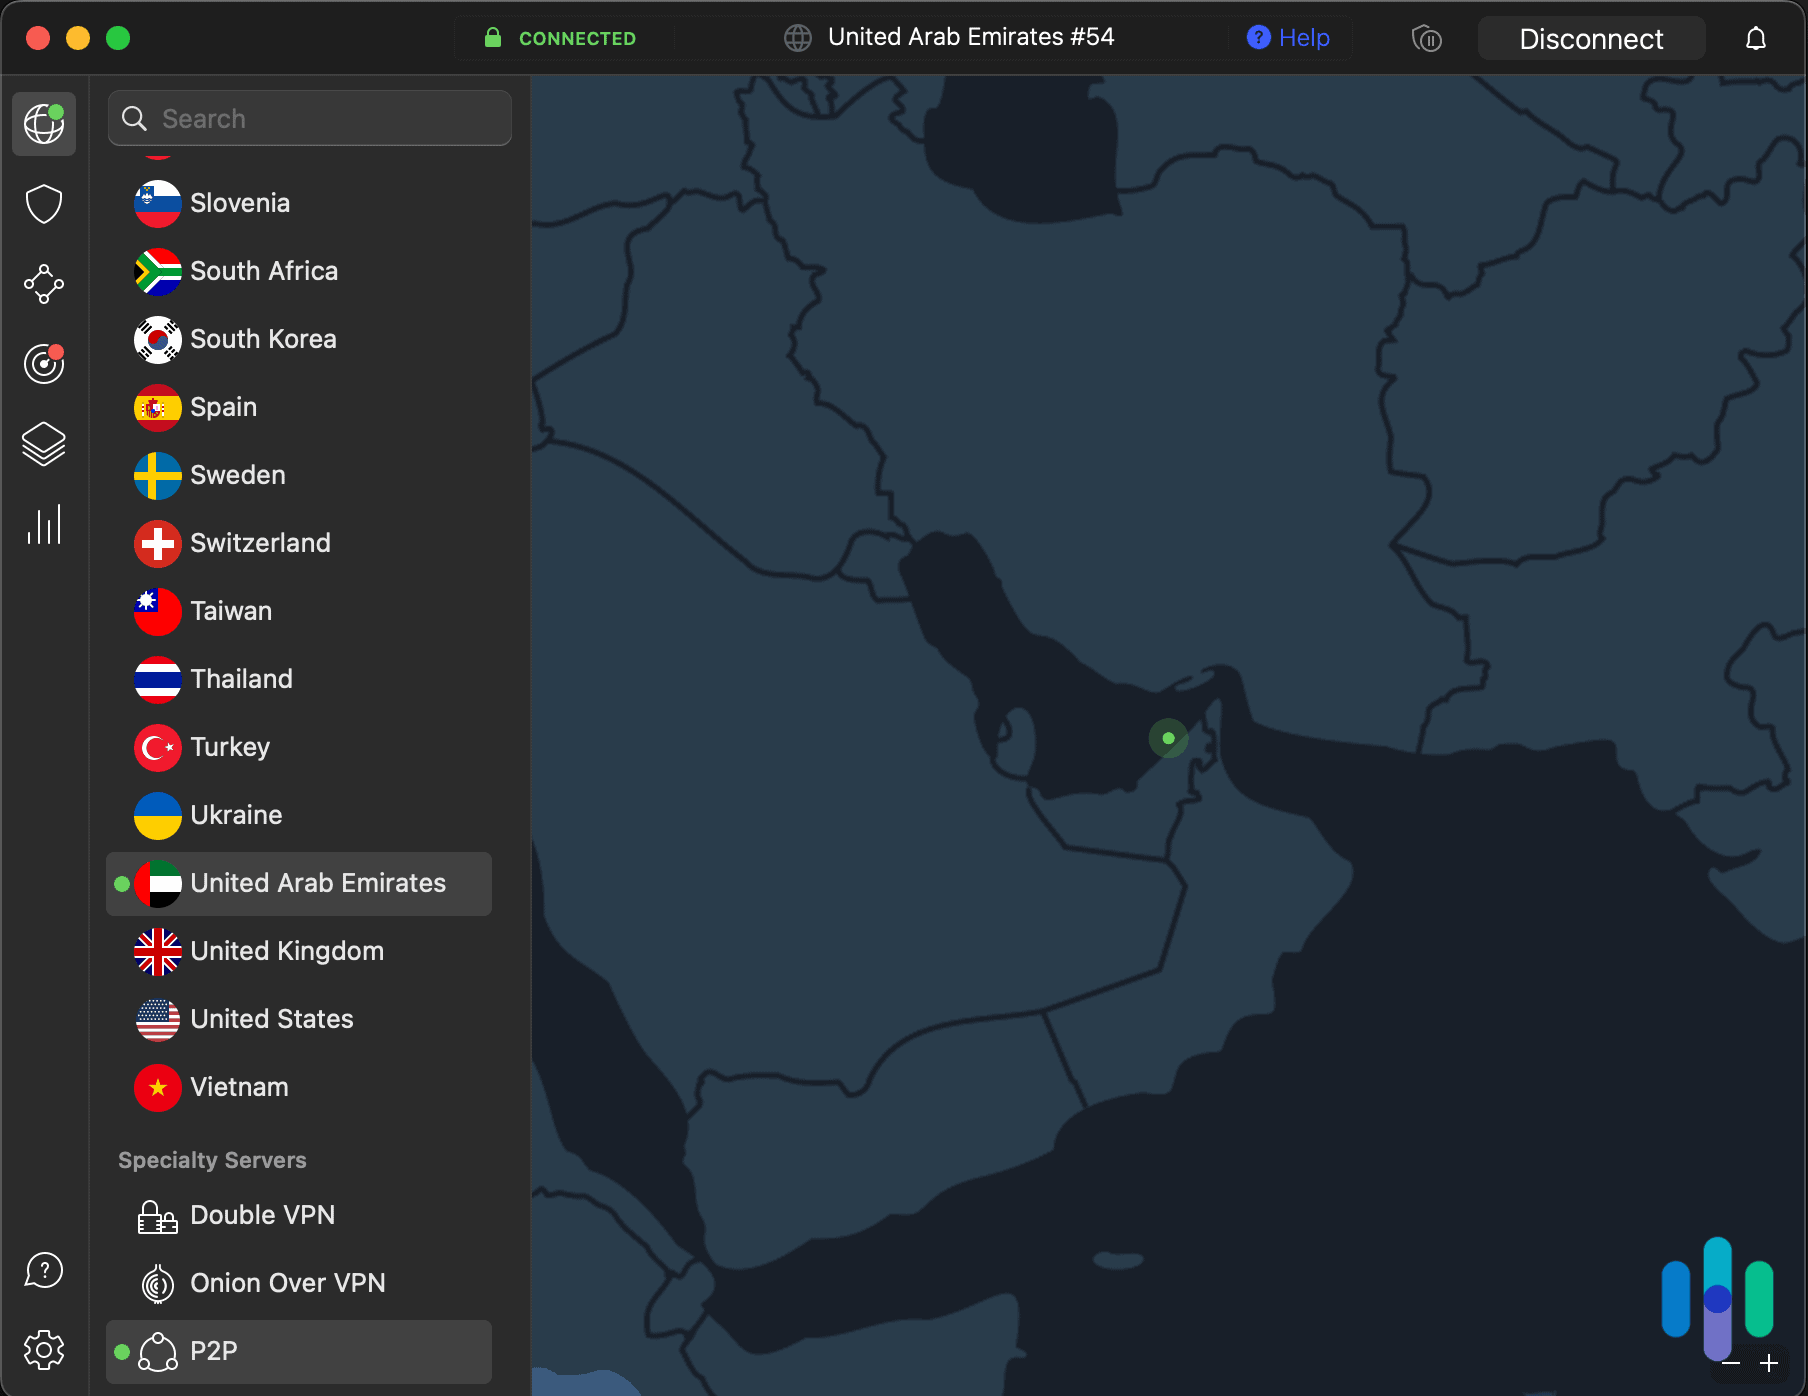 NordVPN connected to United Arab Emirates